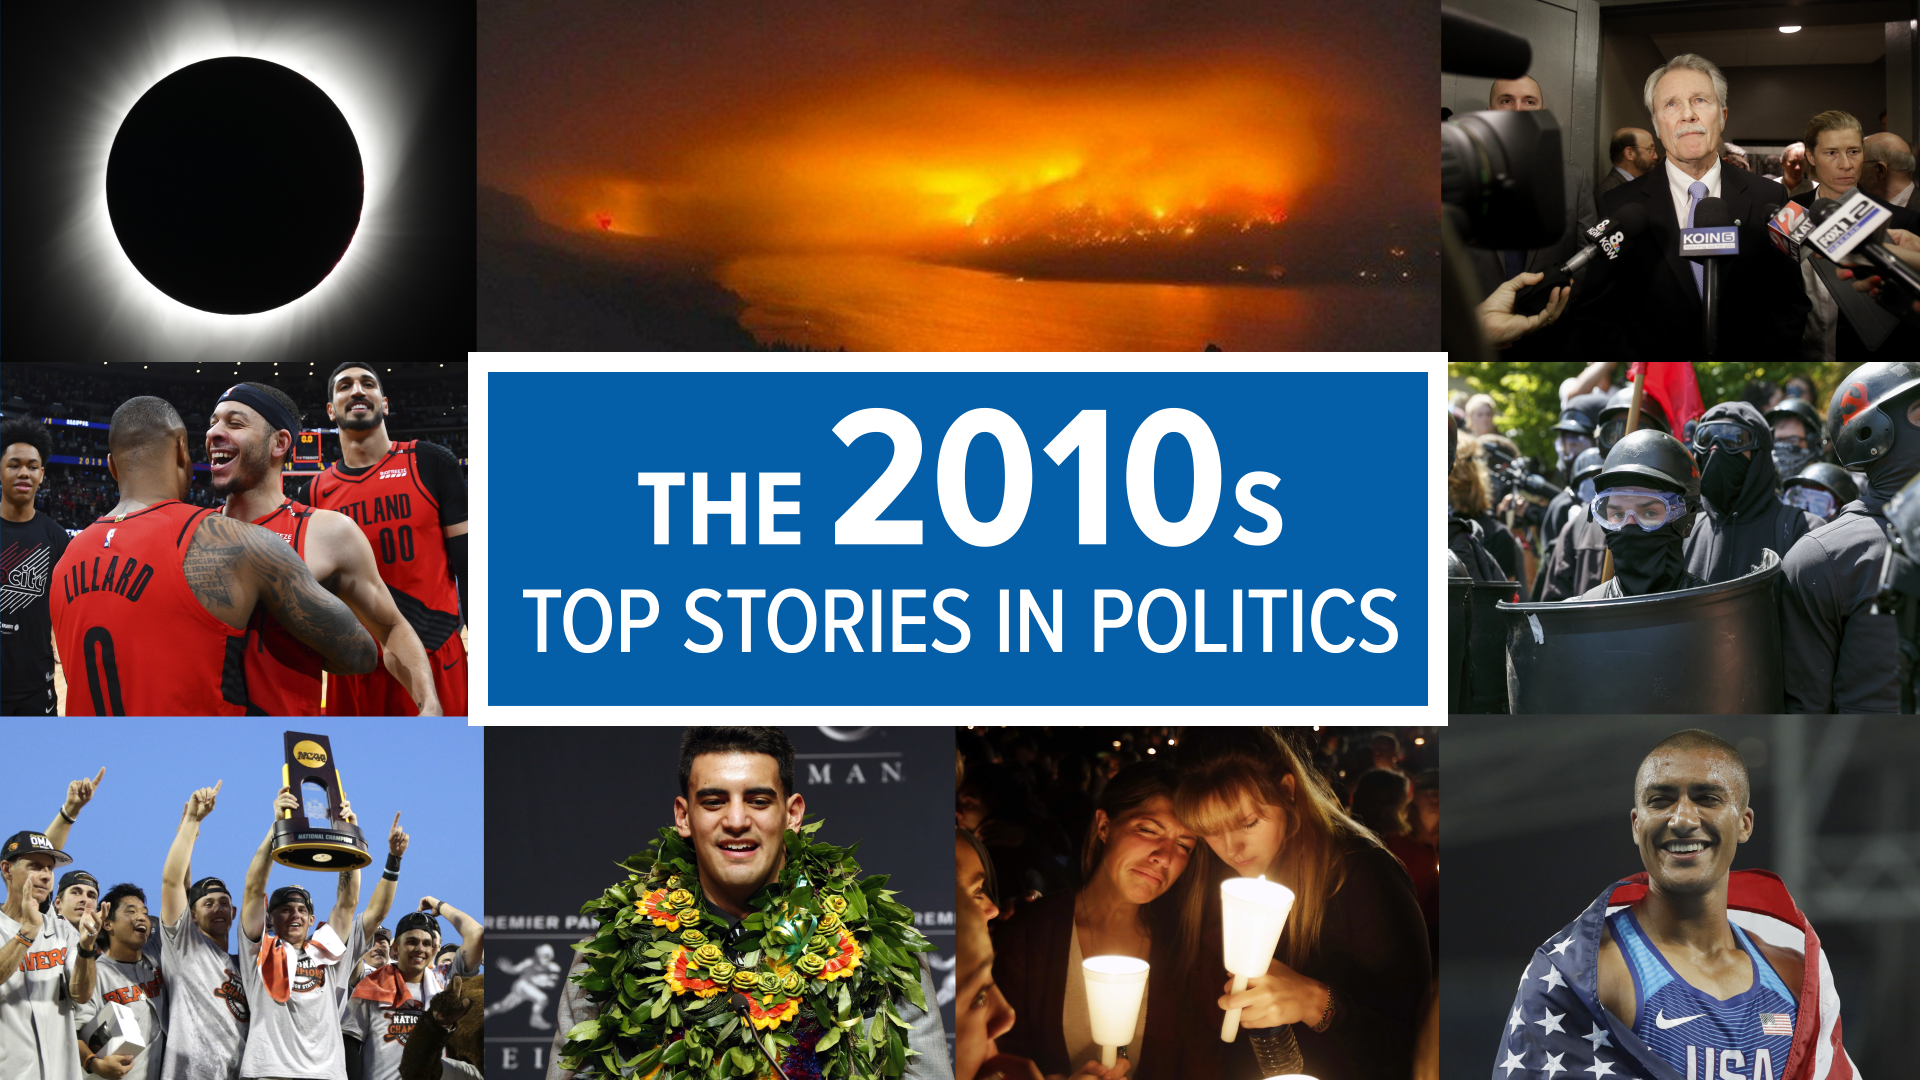 A look back at the top 5 political stories from the decade.